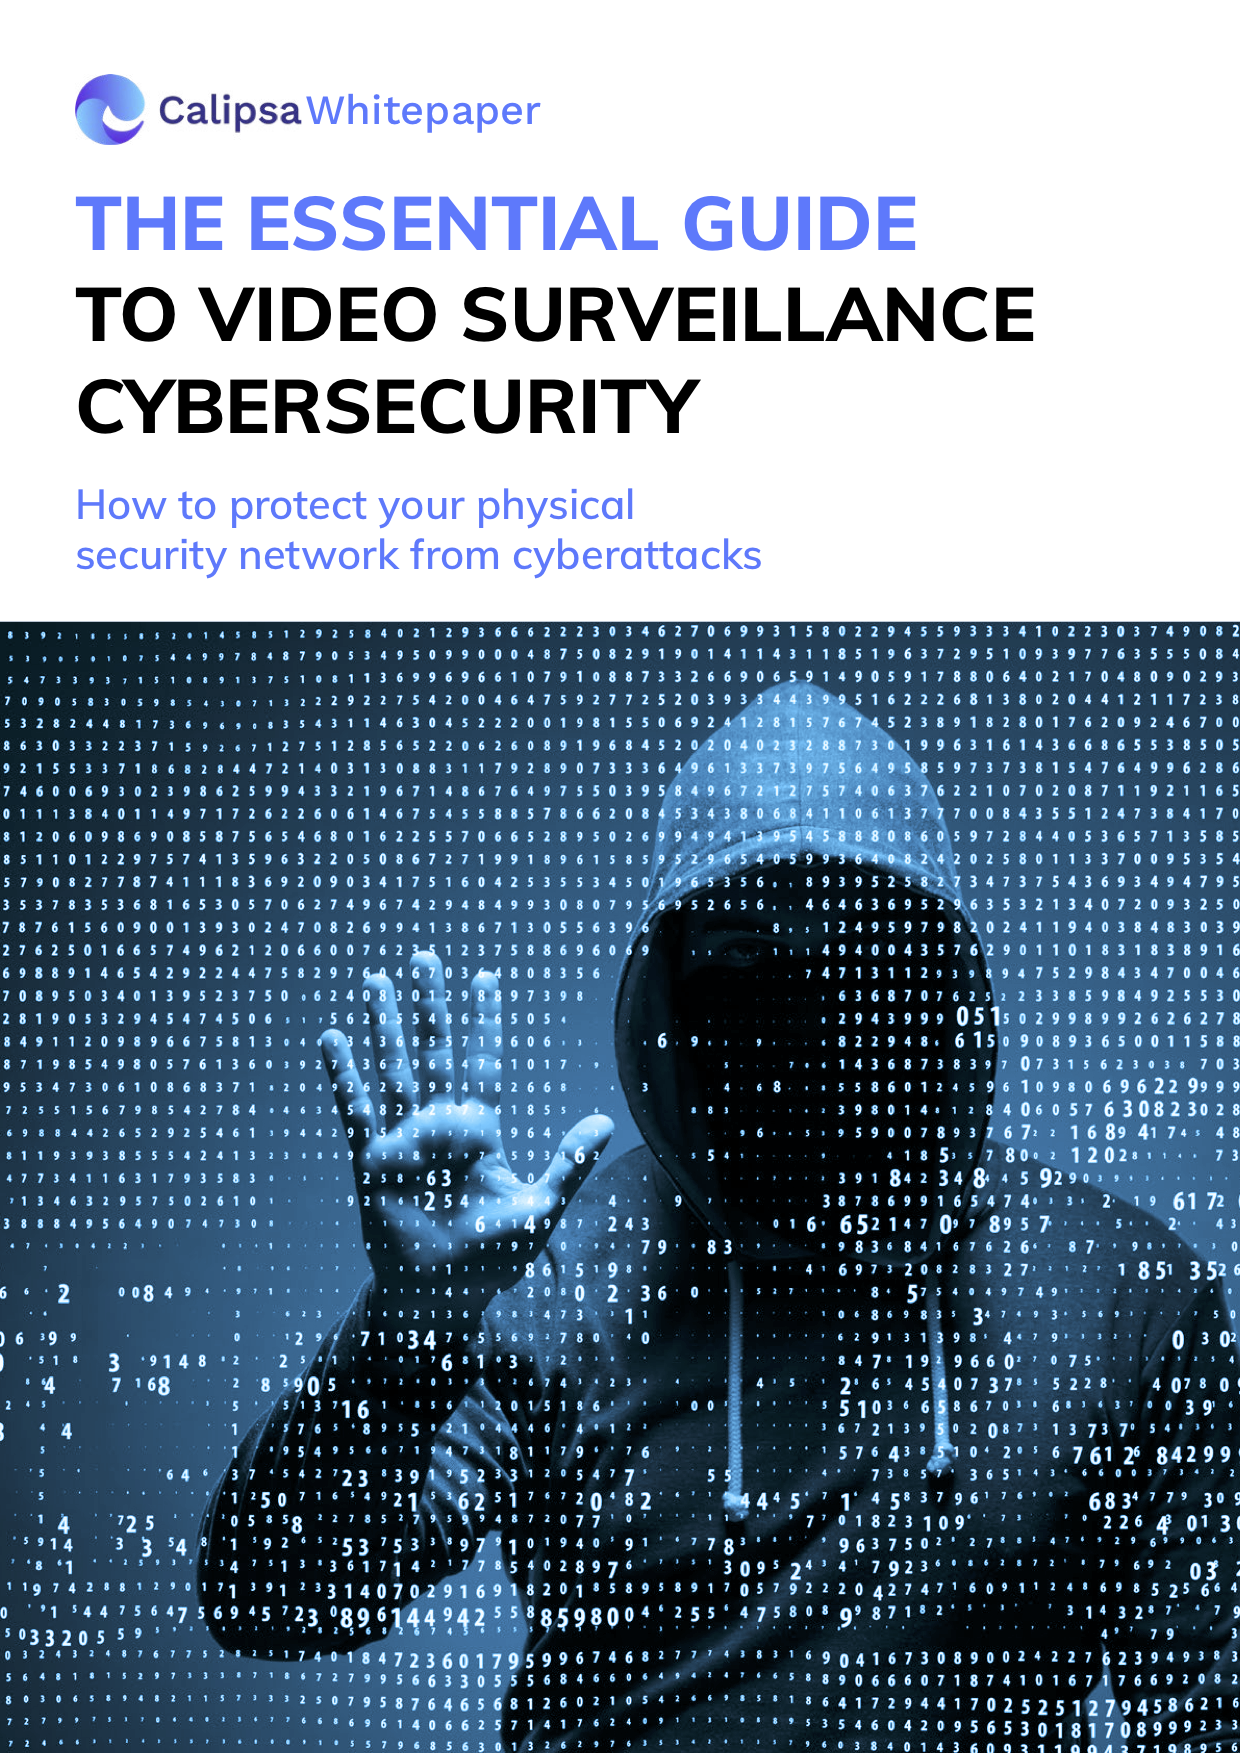 The essential guide to video surveillance cybersecurity-2021